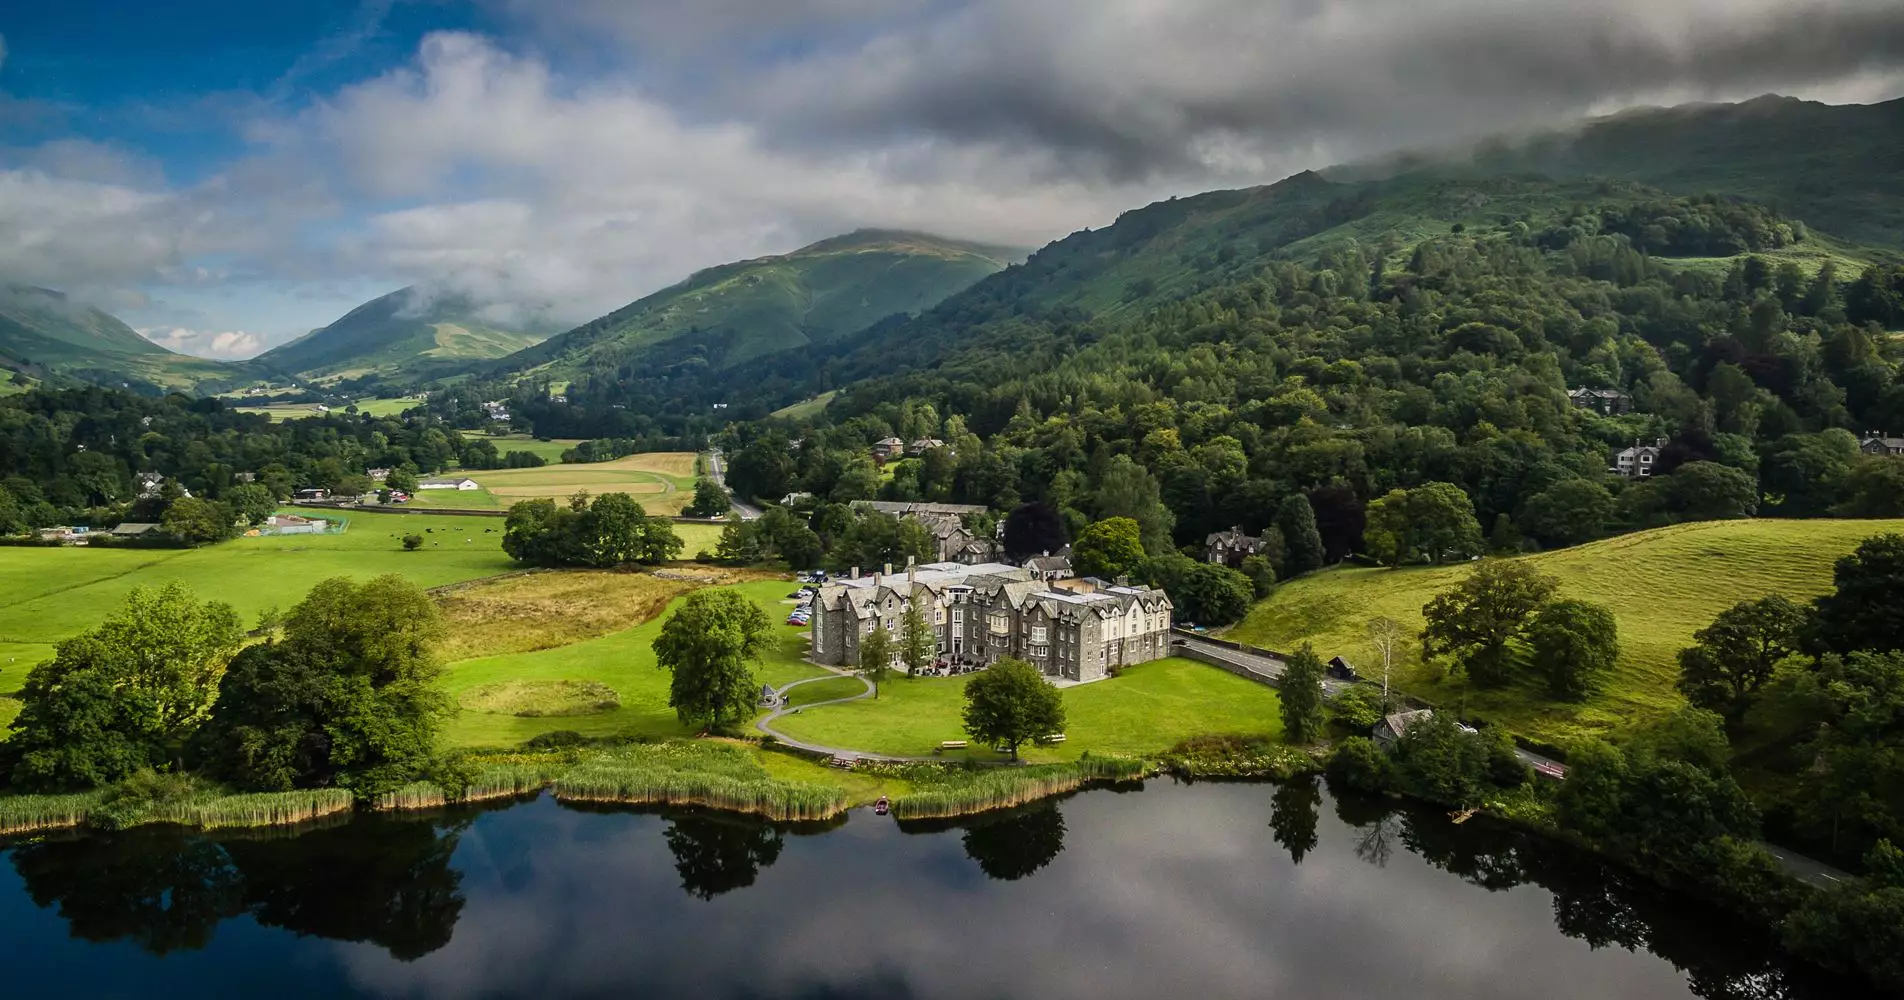 The hotel is set in stunning grounds within the Lake District. (